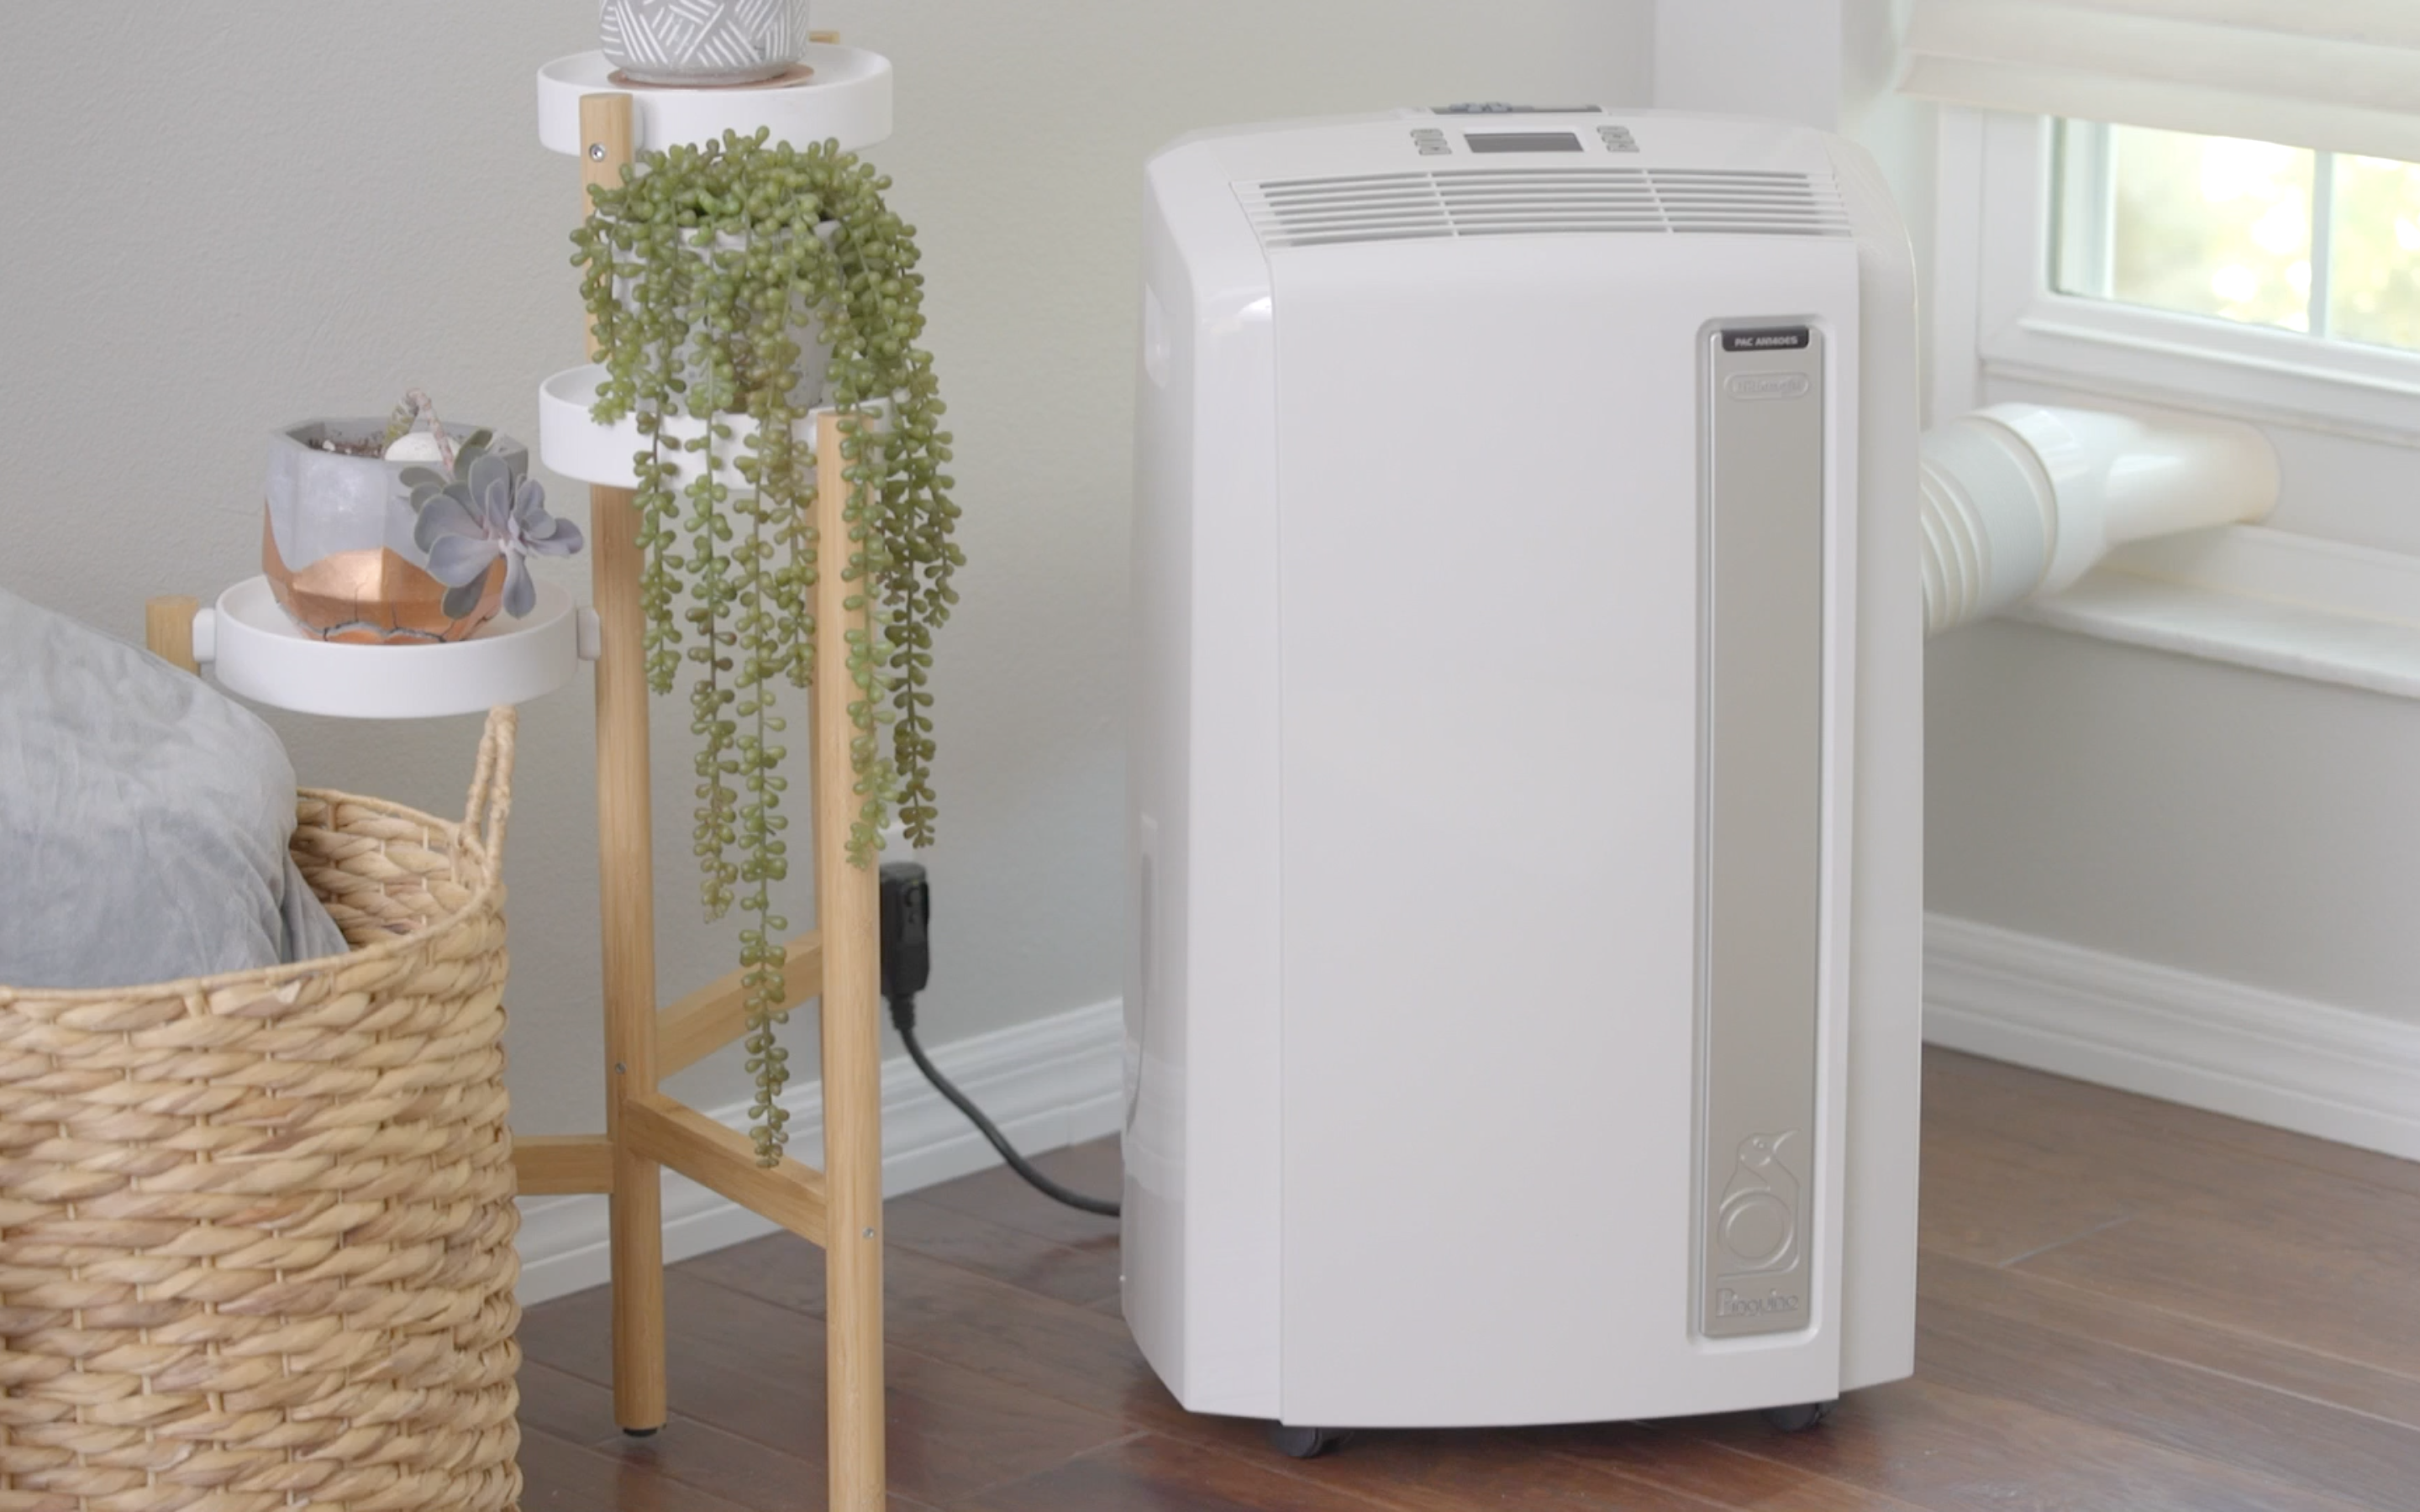 DeLonghi AC Instructional Video from Jumpstart Productions